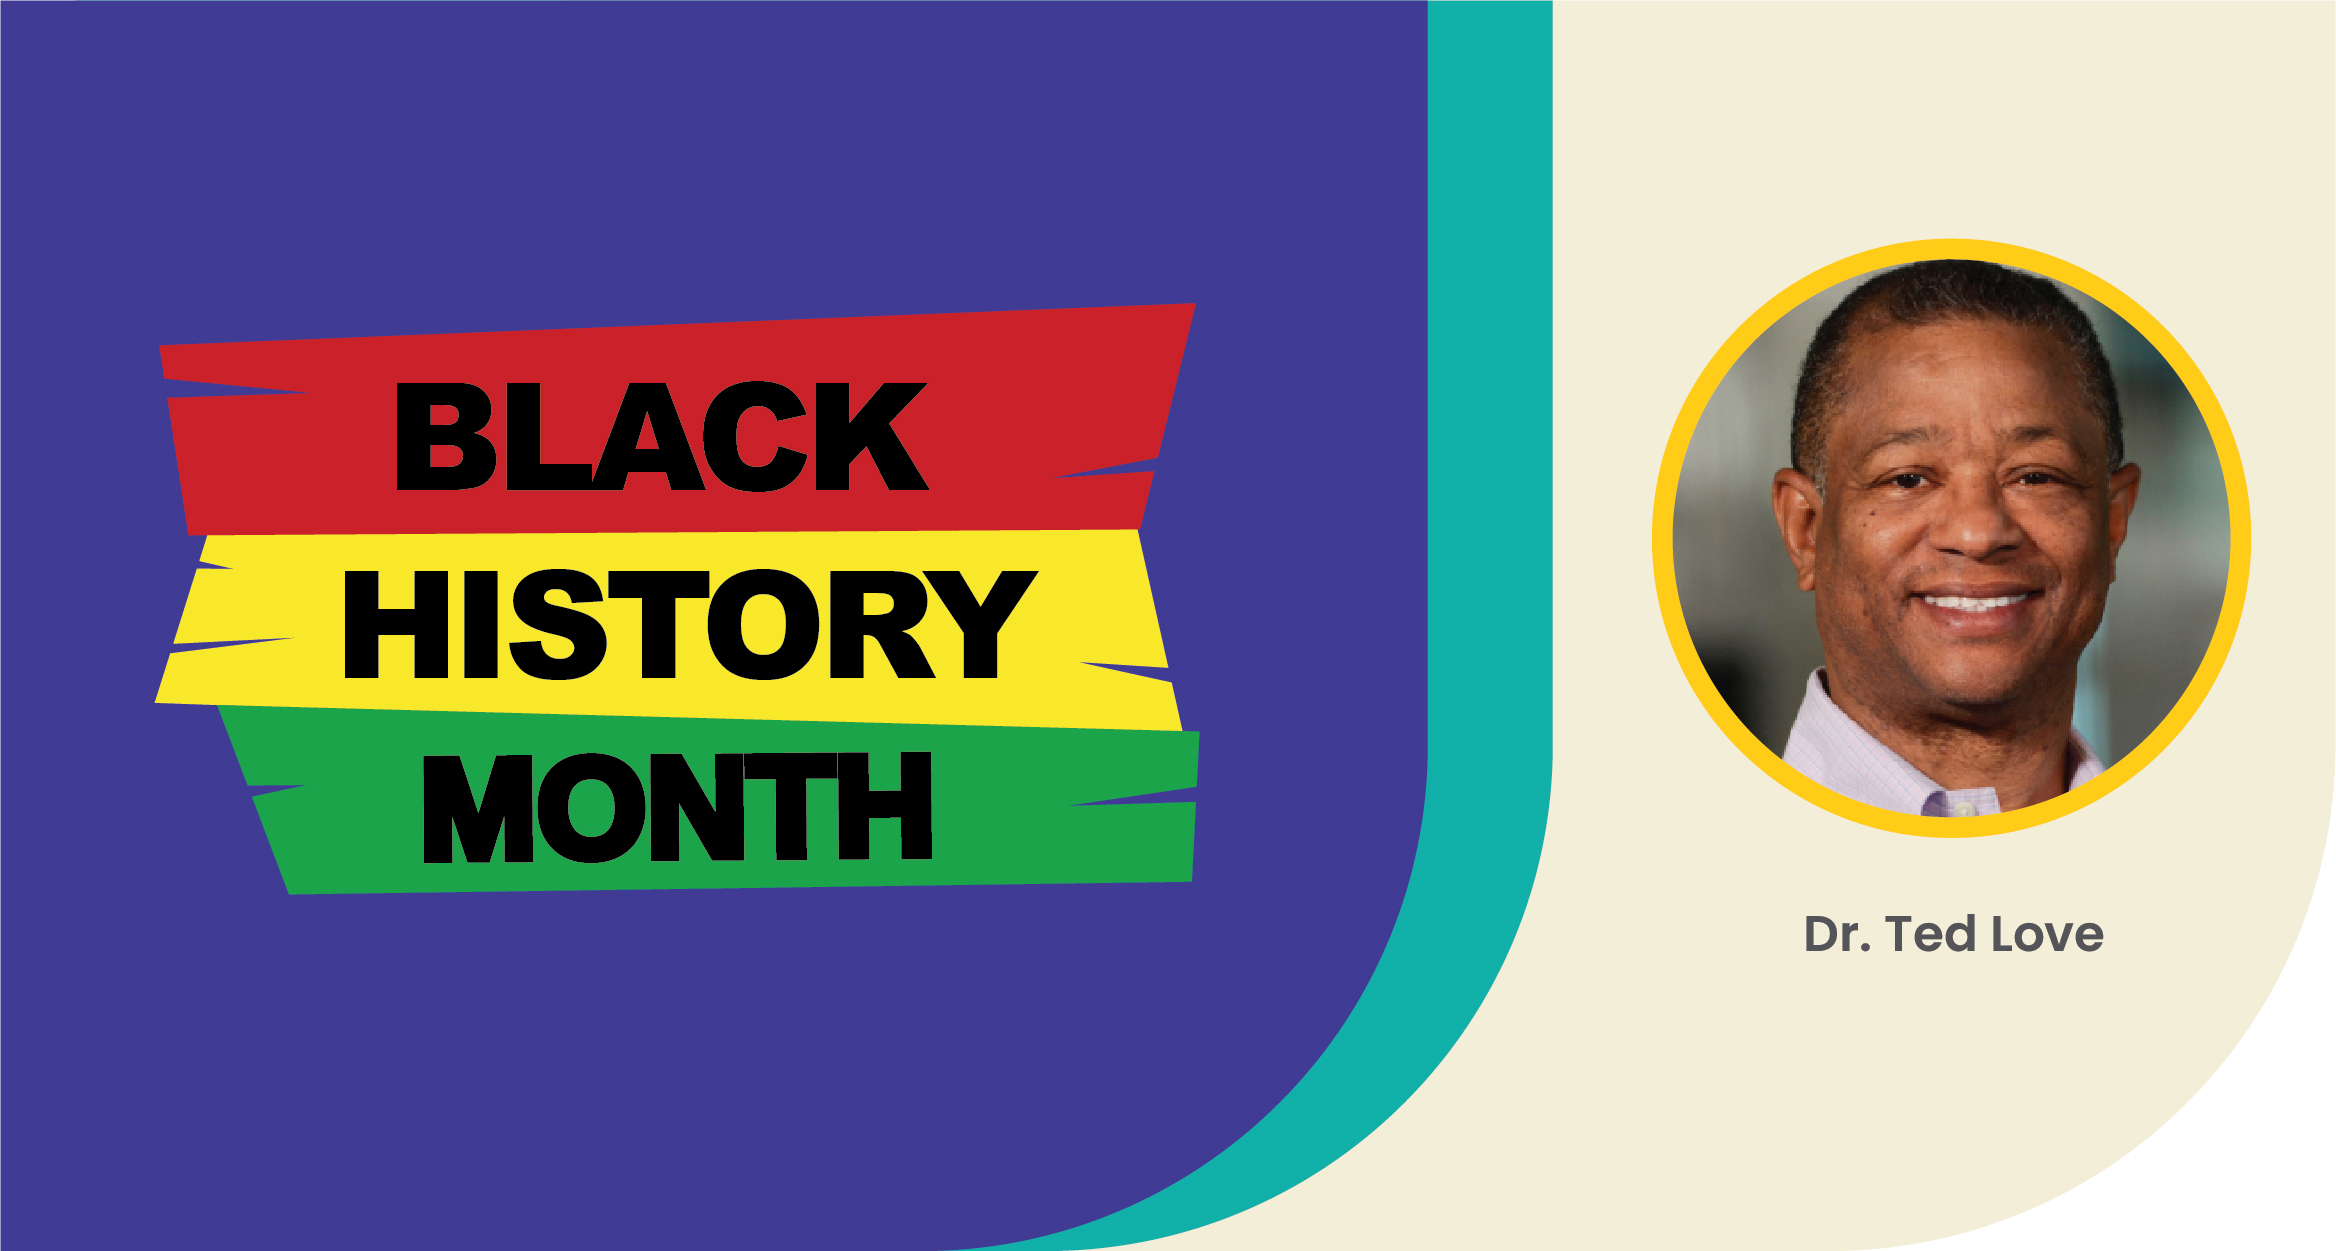 Black History Month: Dr. Ted Love